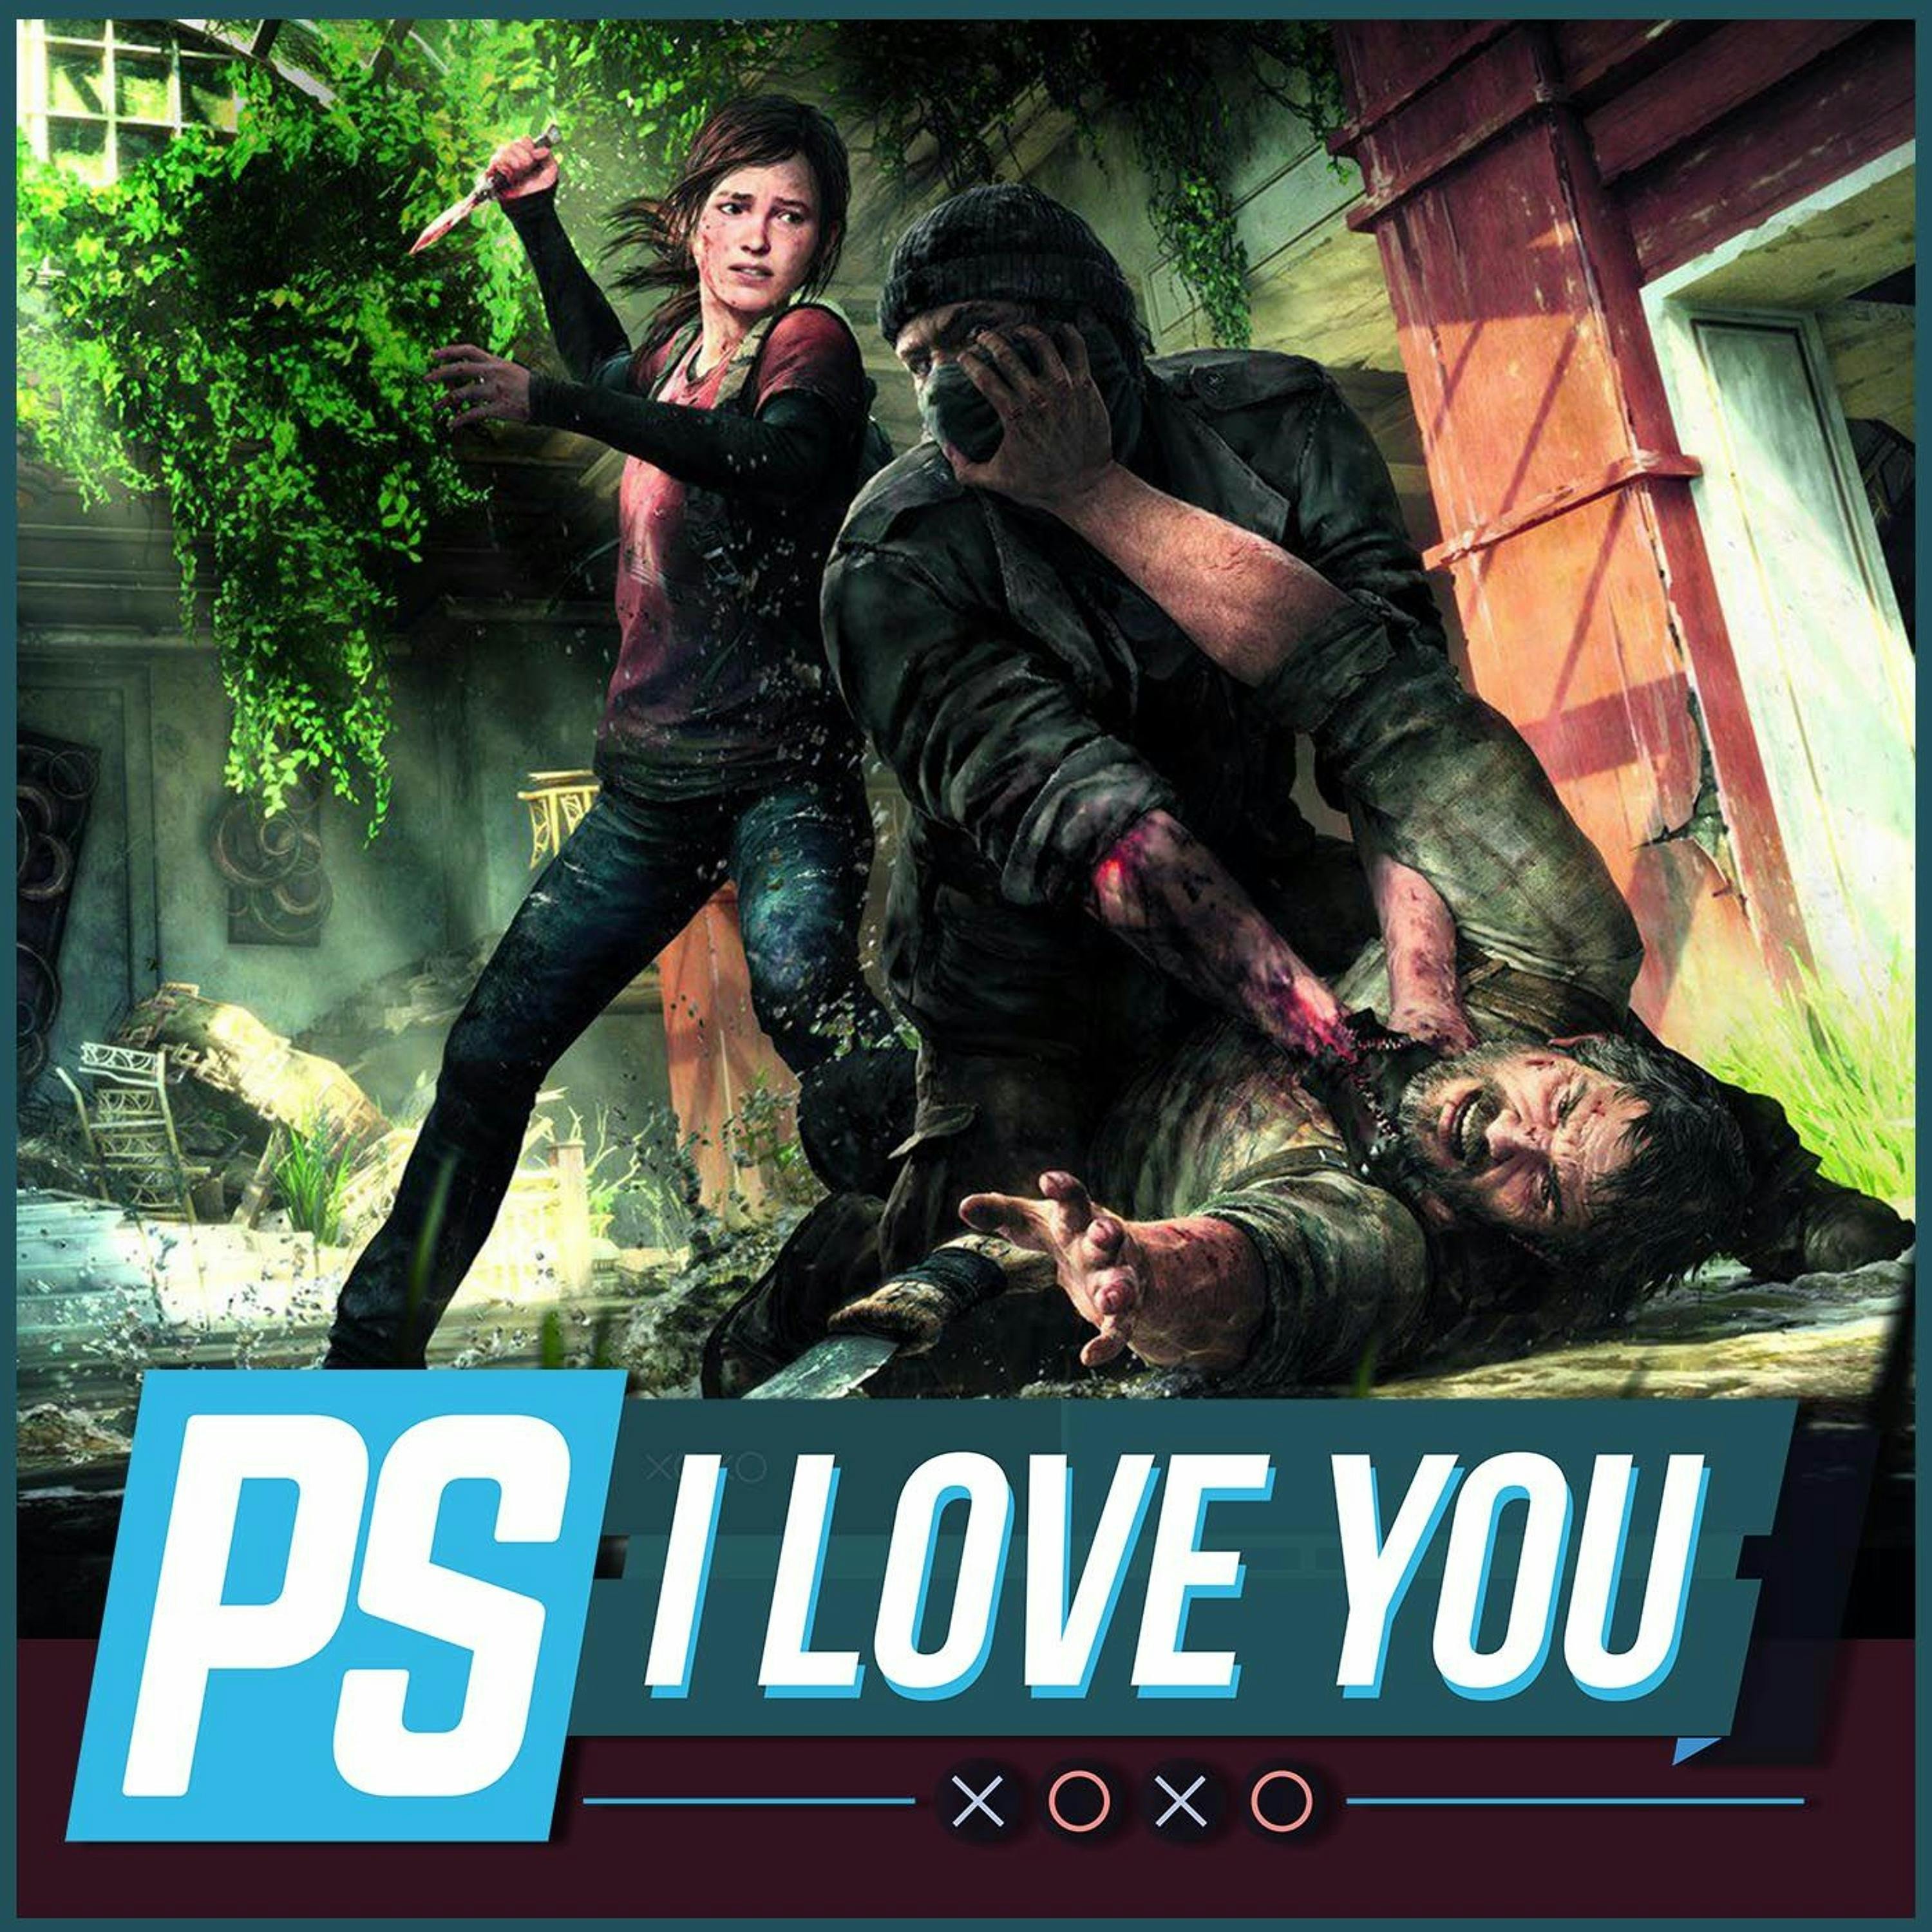 Here's What The Last of Us 2 Should Be About - PS I Love You XOXO Ep. 36